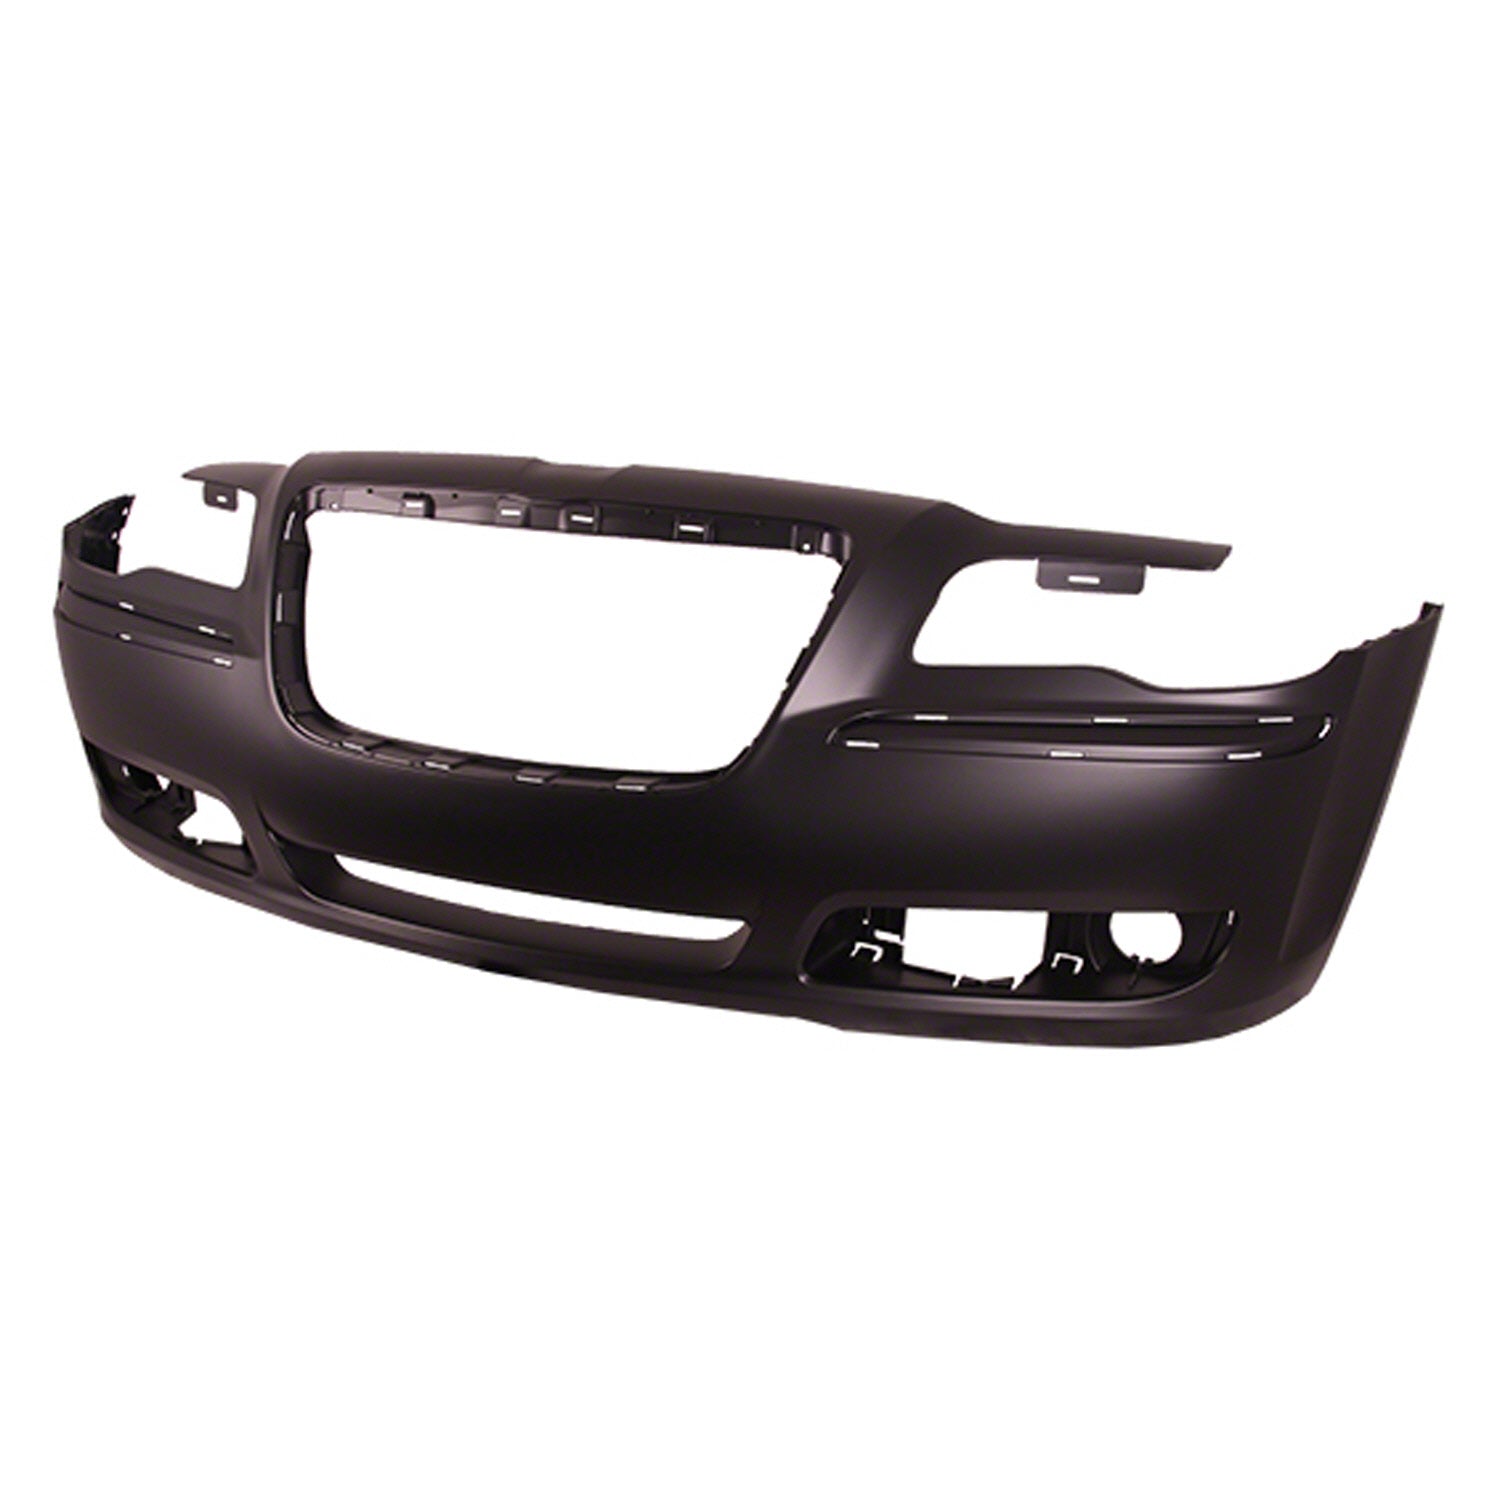 Front bumper cover 2011 - 2014 CHRYSLER 300 CAPA CH1000A00PP 68127938AE